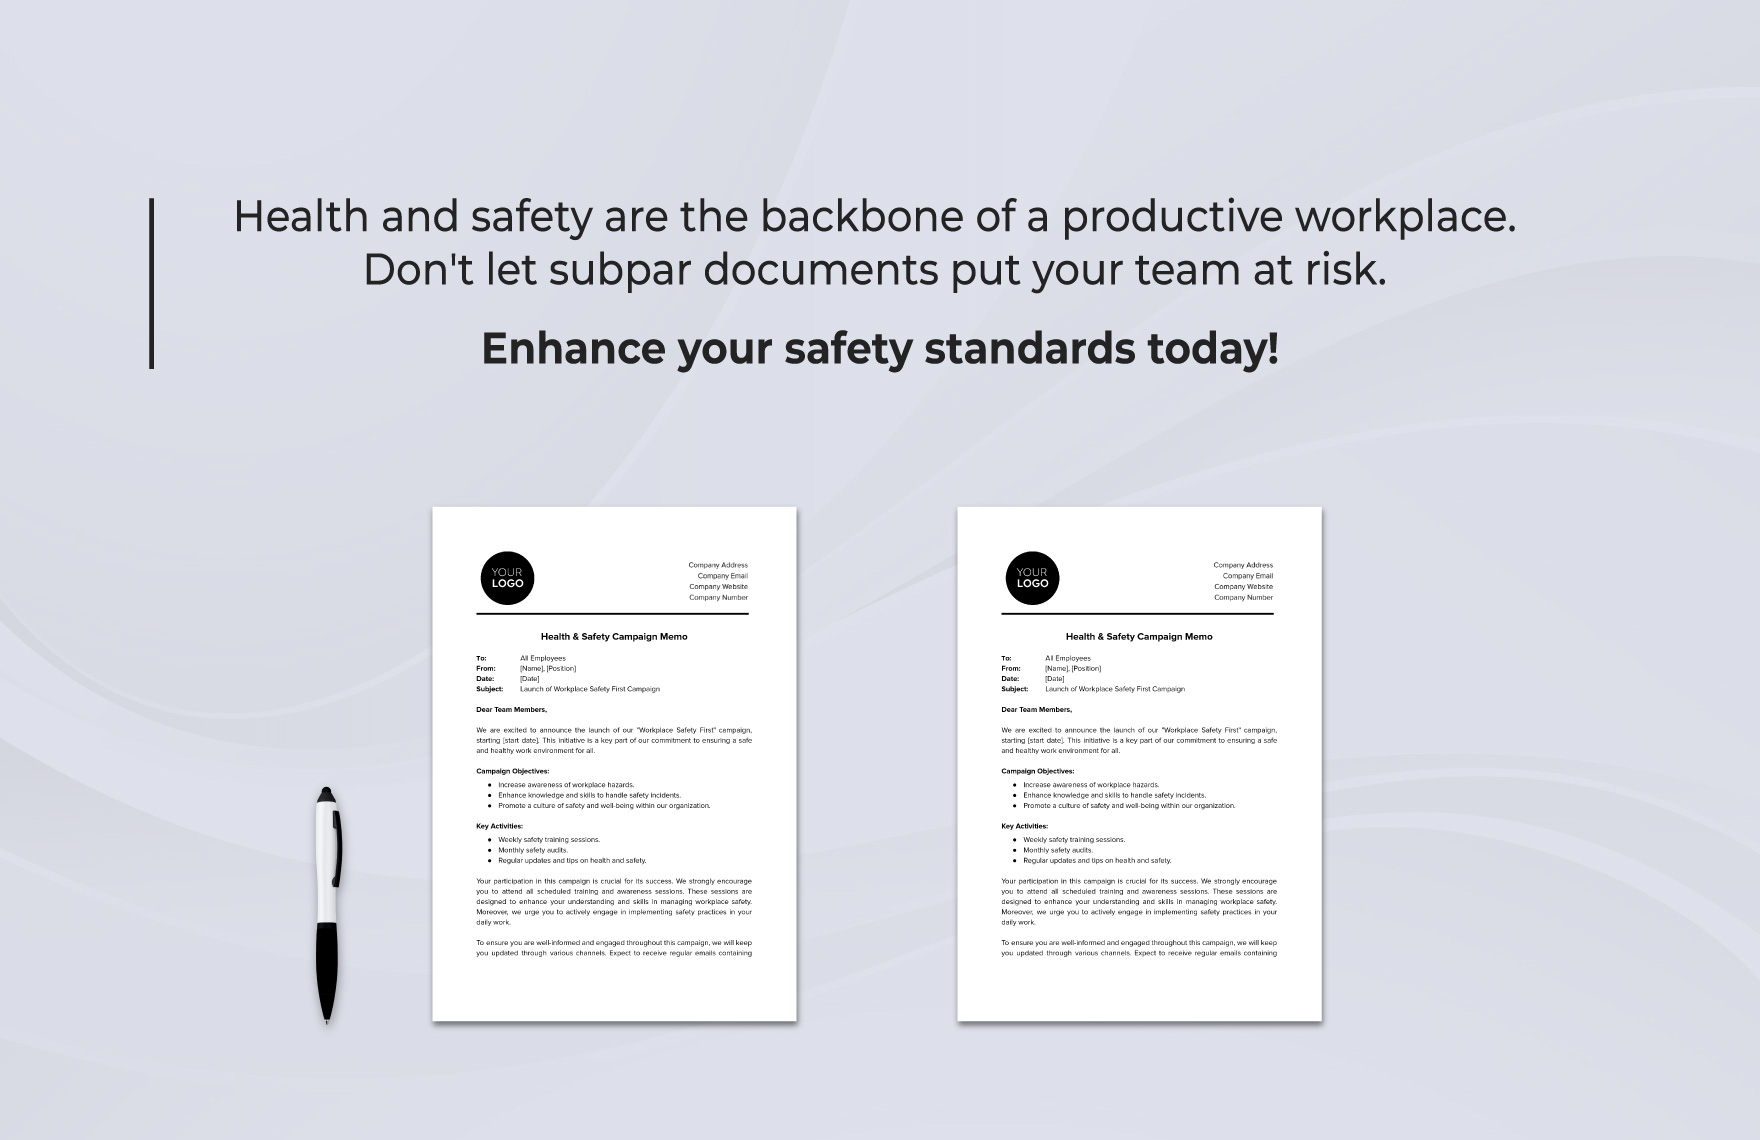 Health & Safety Campaign Memo Template